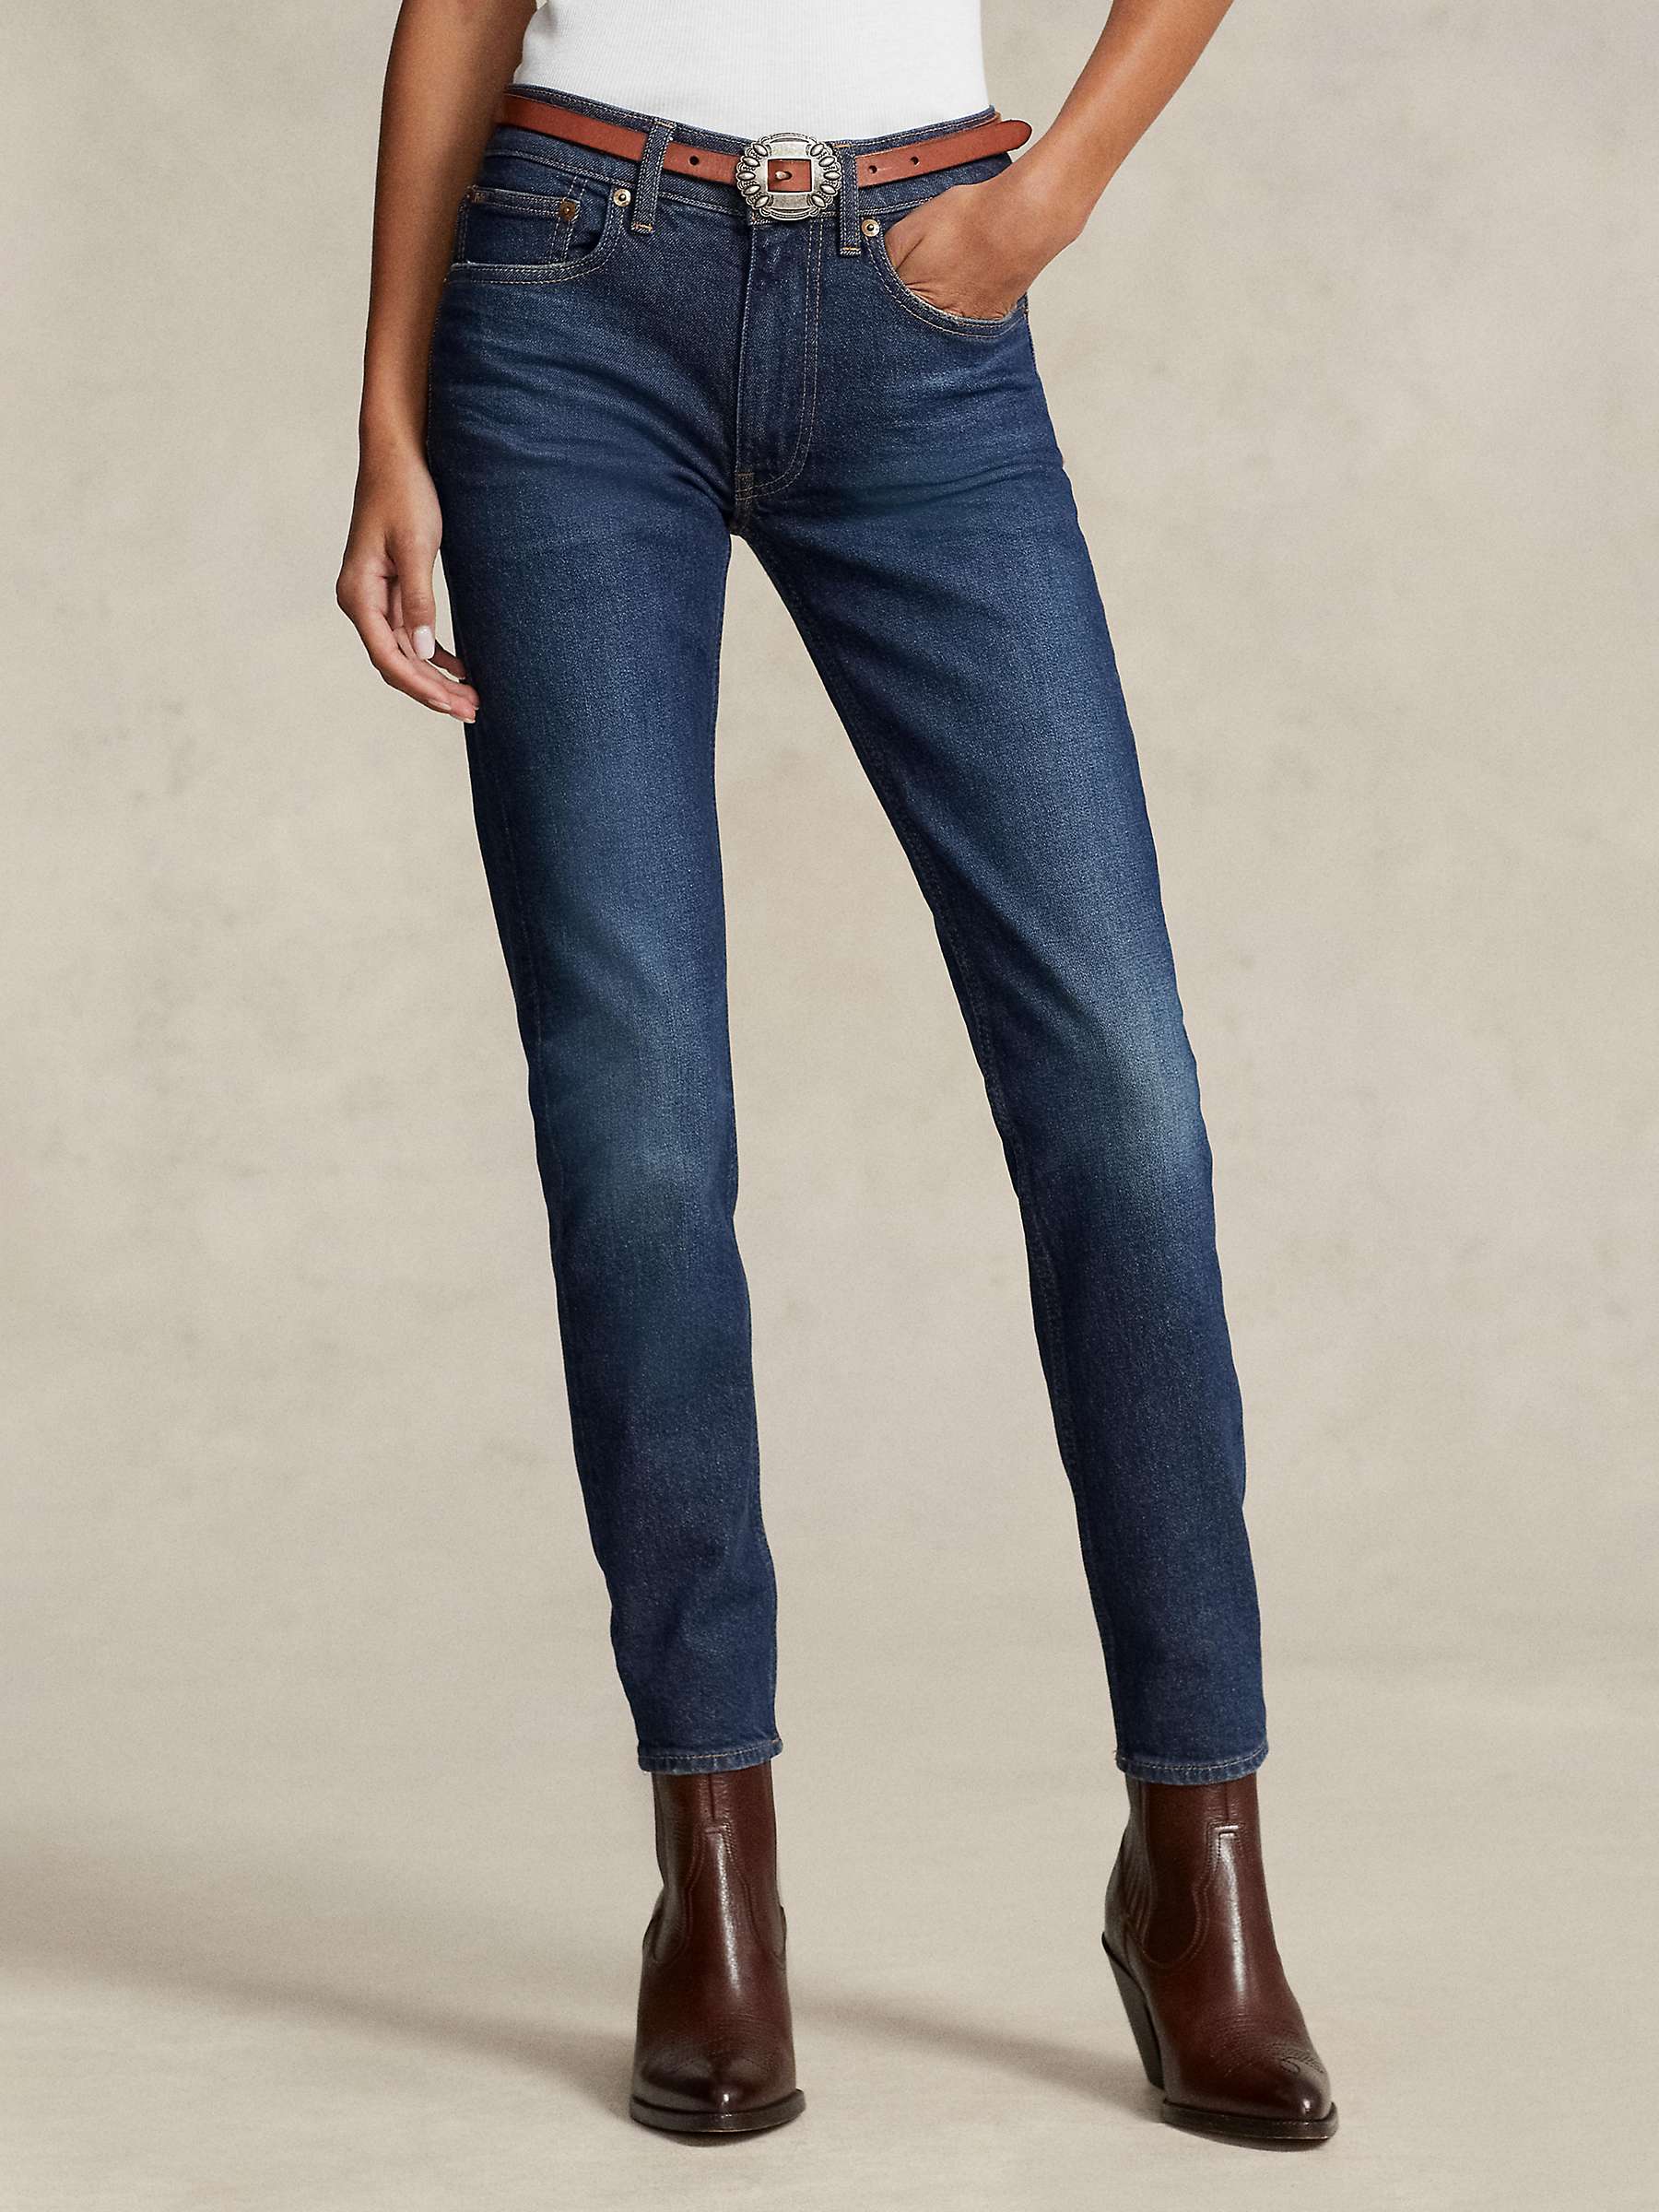 Buy Polo Ralph Lauren Mid Rise Skinny Jeans, Celebes Wash Online at johnlewis.com